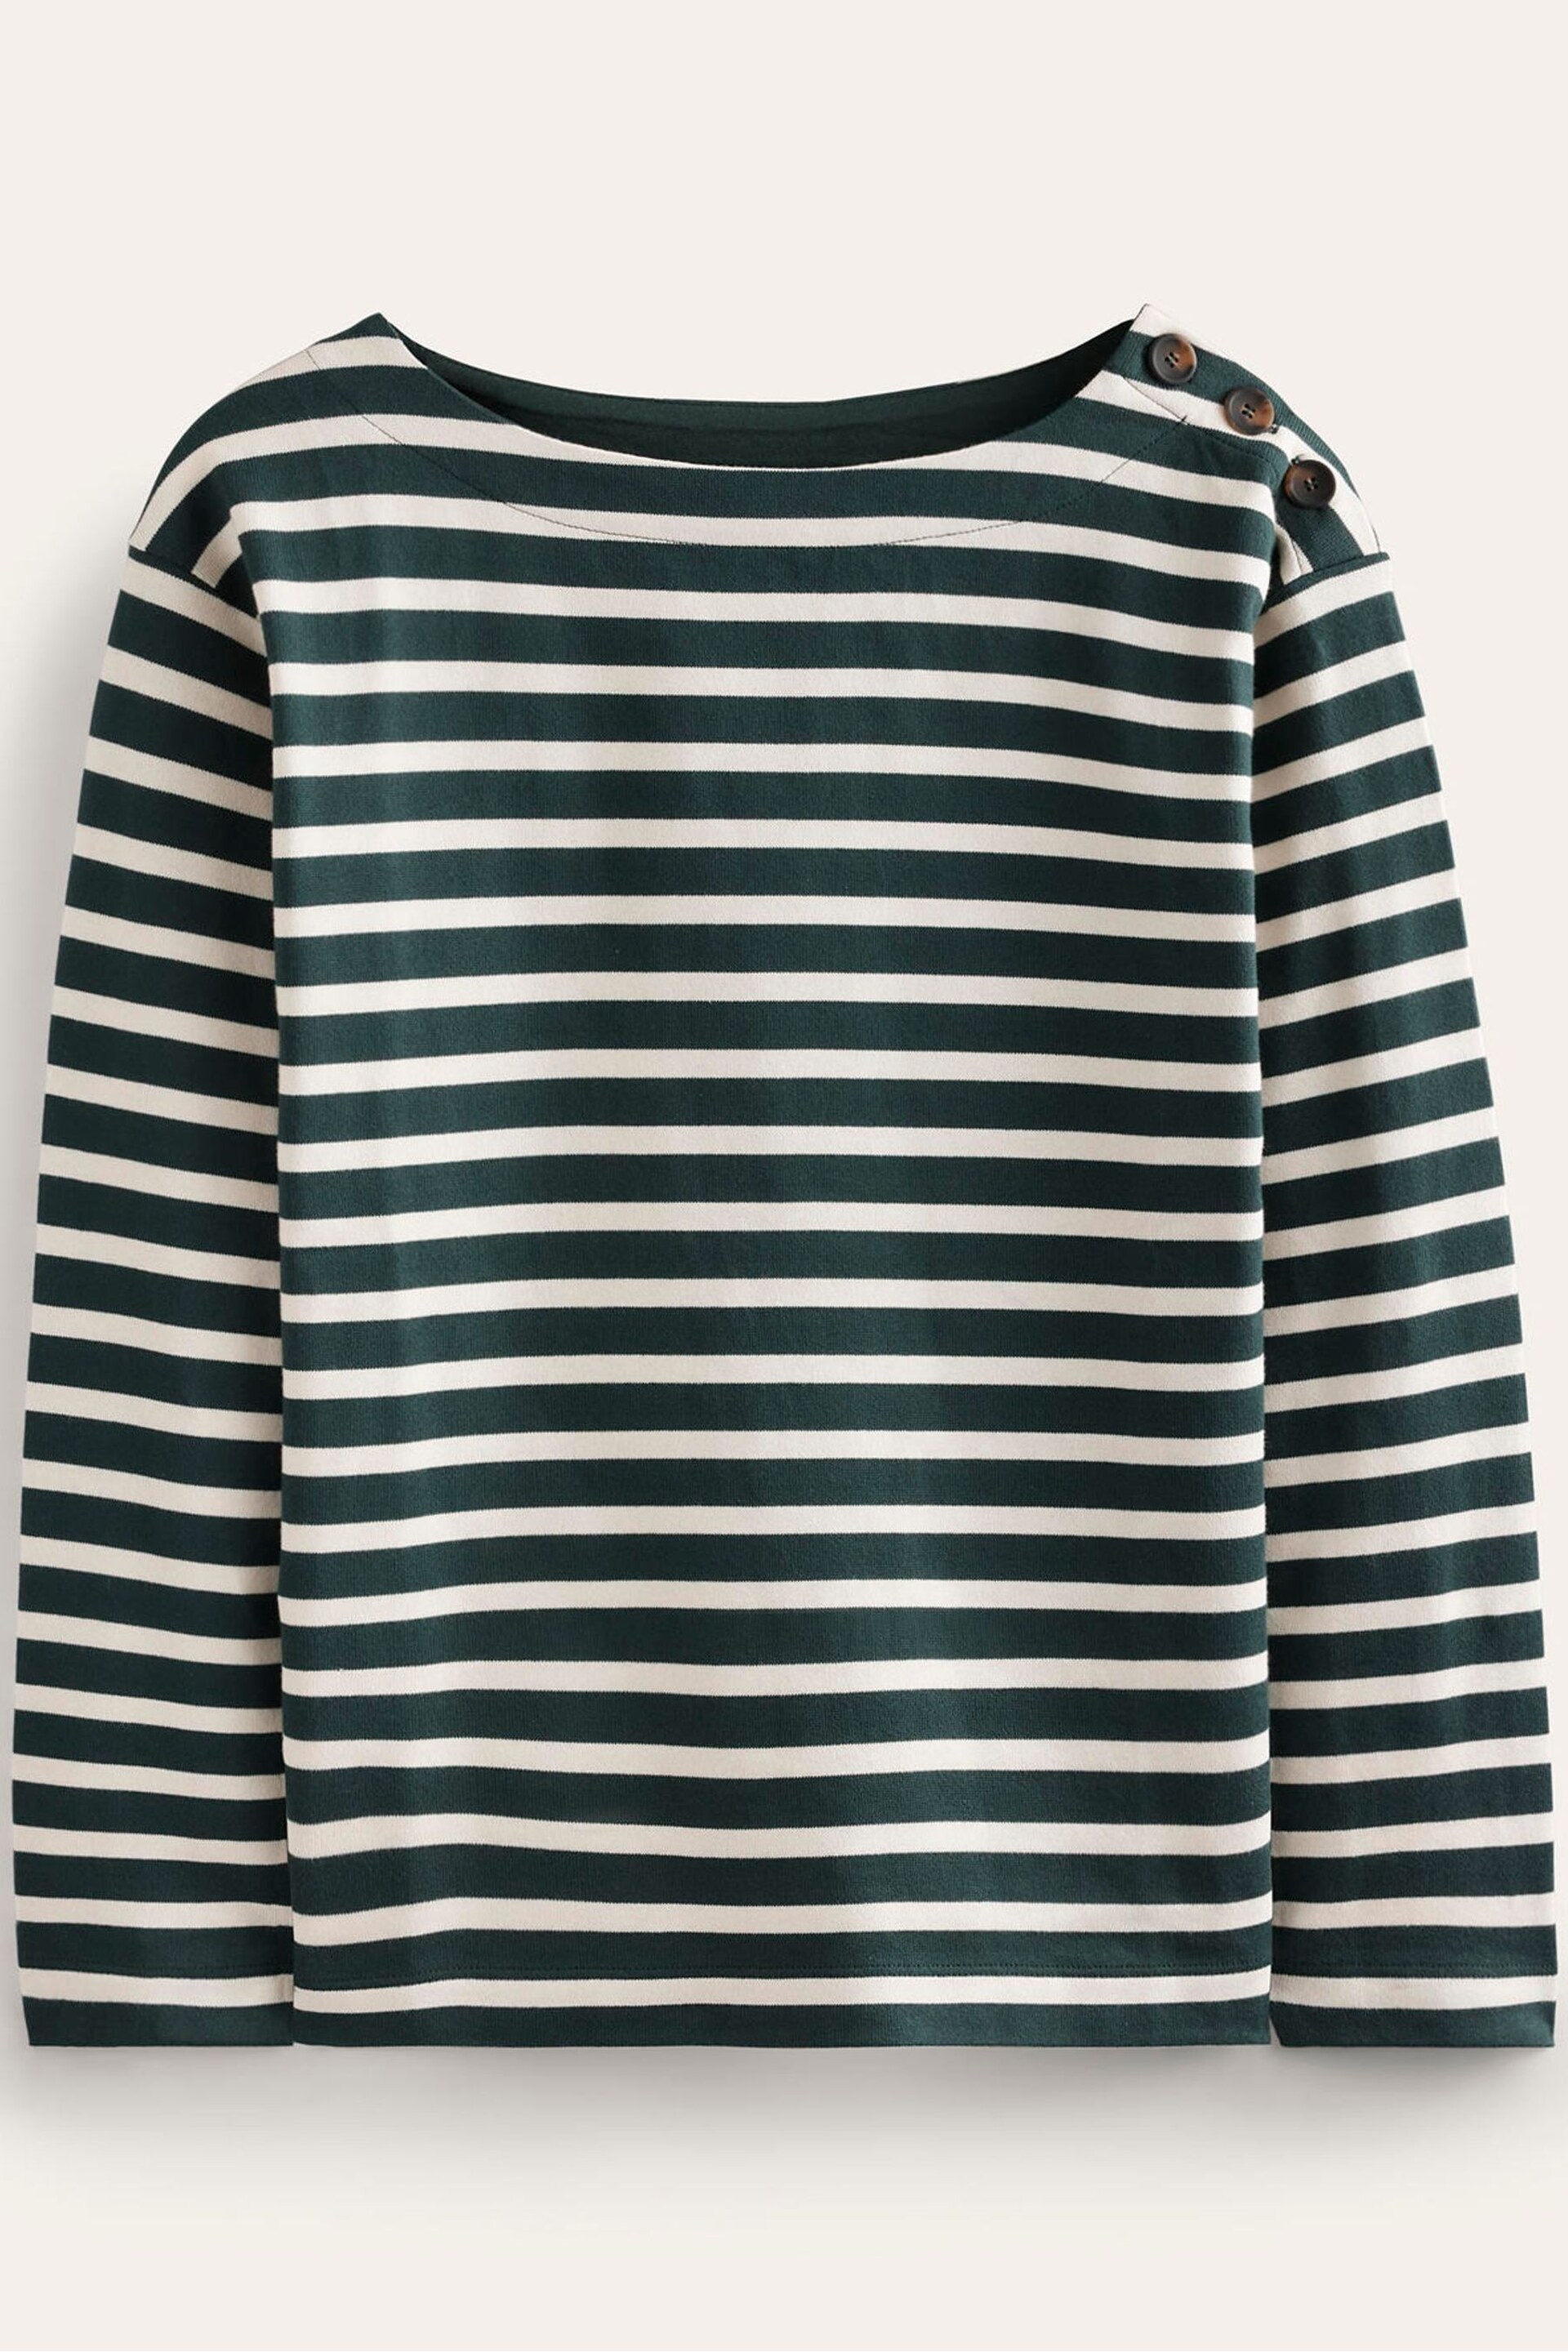 Boden Green Sophie Heavyweight Breton Top - Image 5 of 5